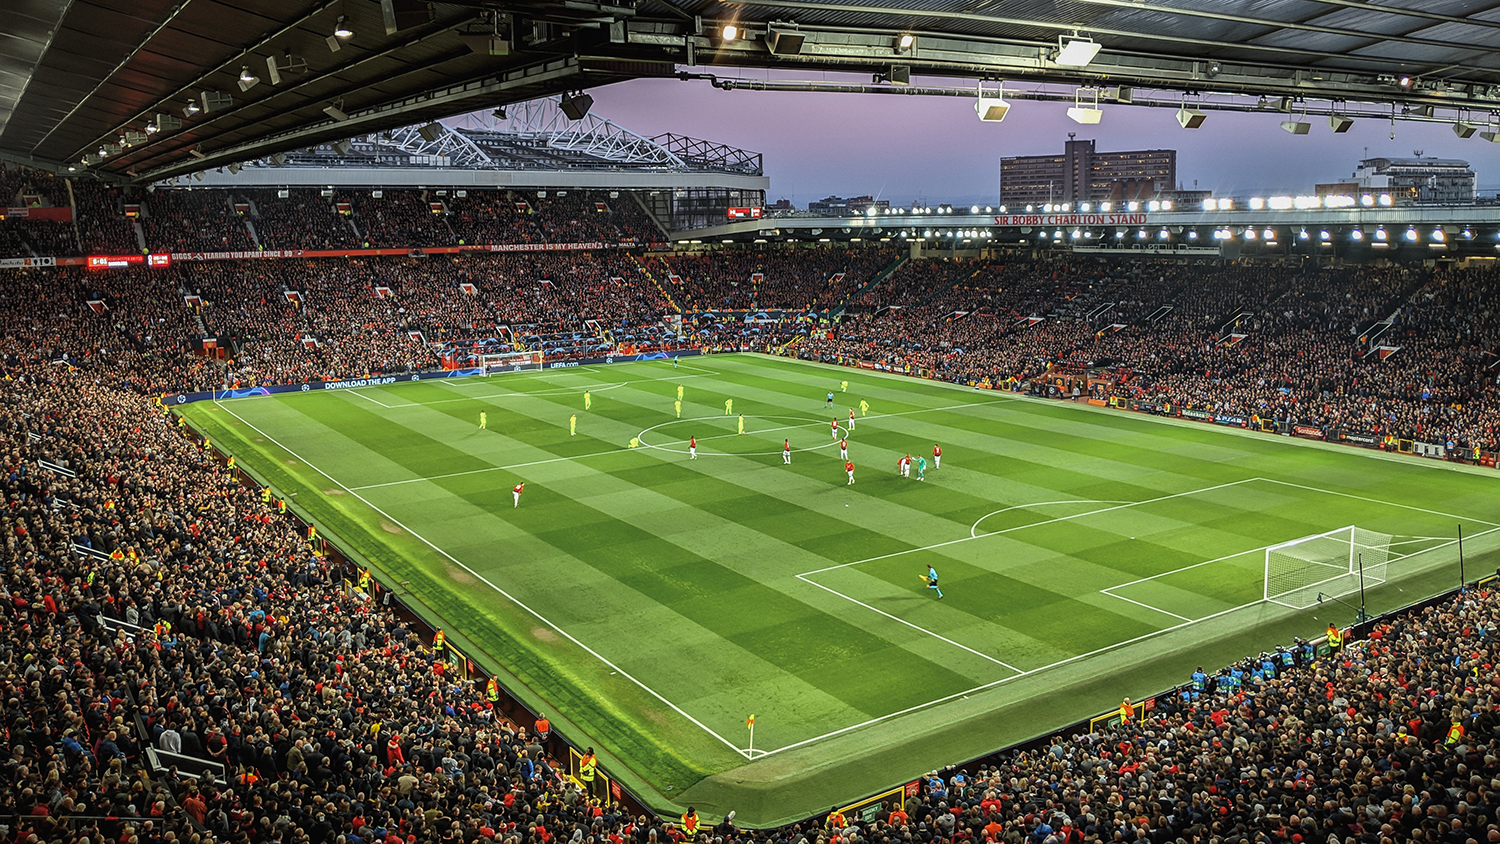 Wide-angle view of Old Trafford stadium in Old Trafford, Greater Manchester, England.